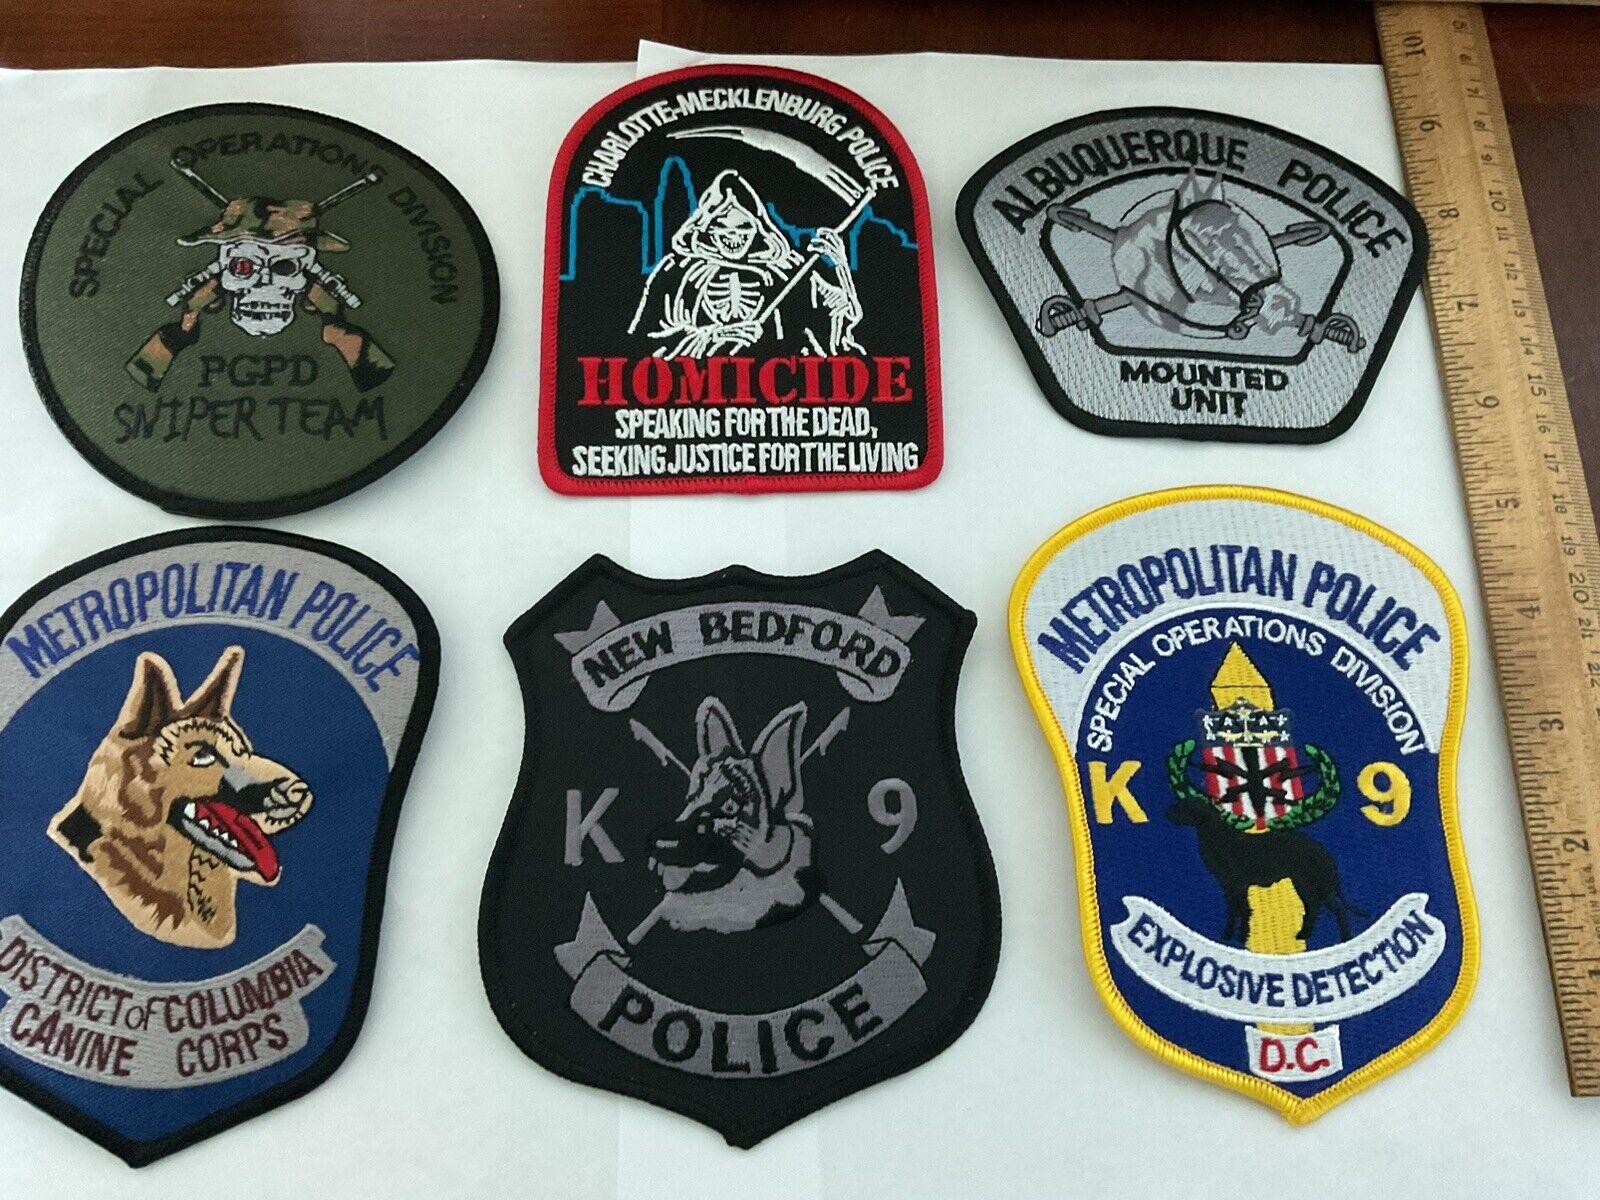 Police Law Enforcement patches All different 6 piece set. All new.Full size